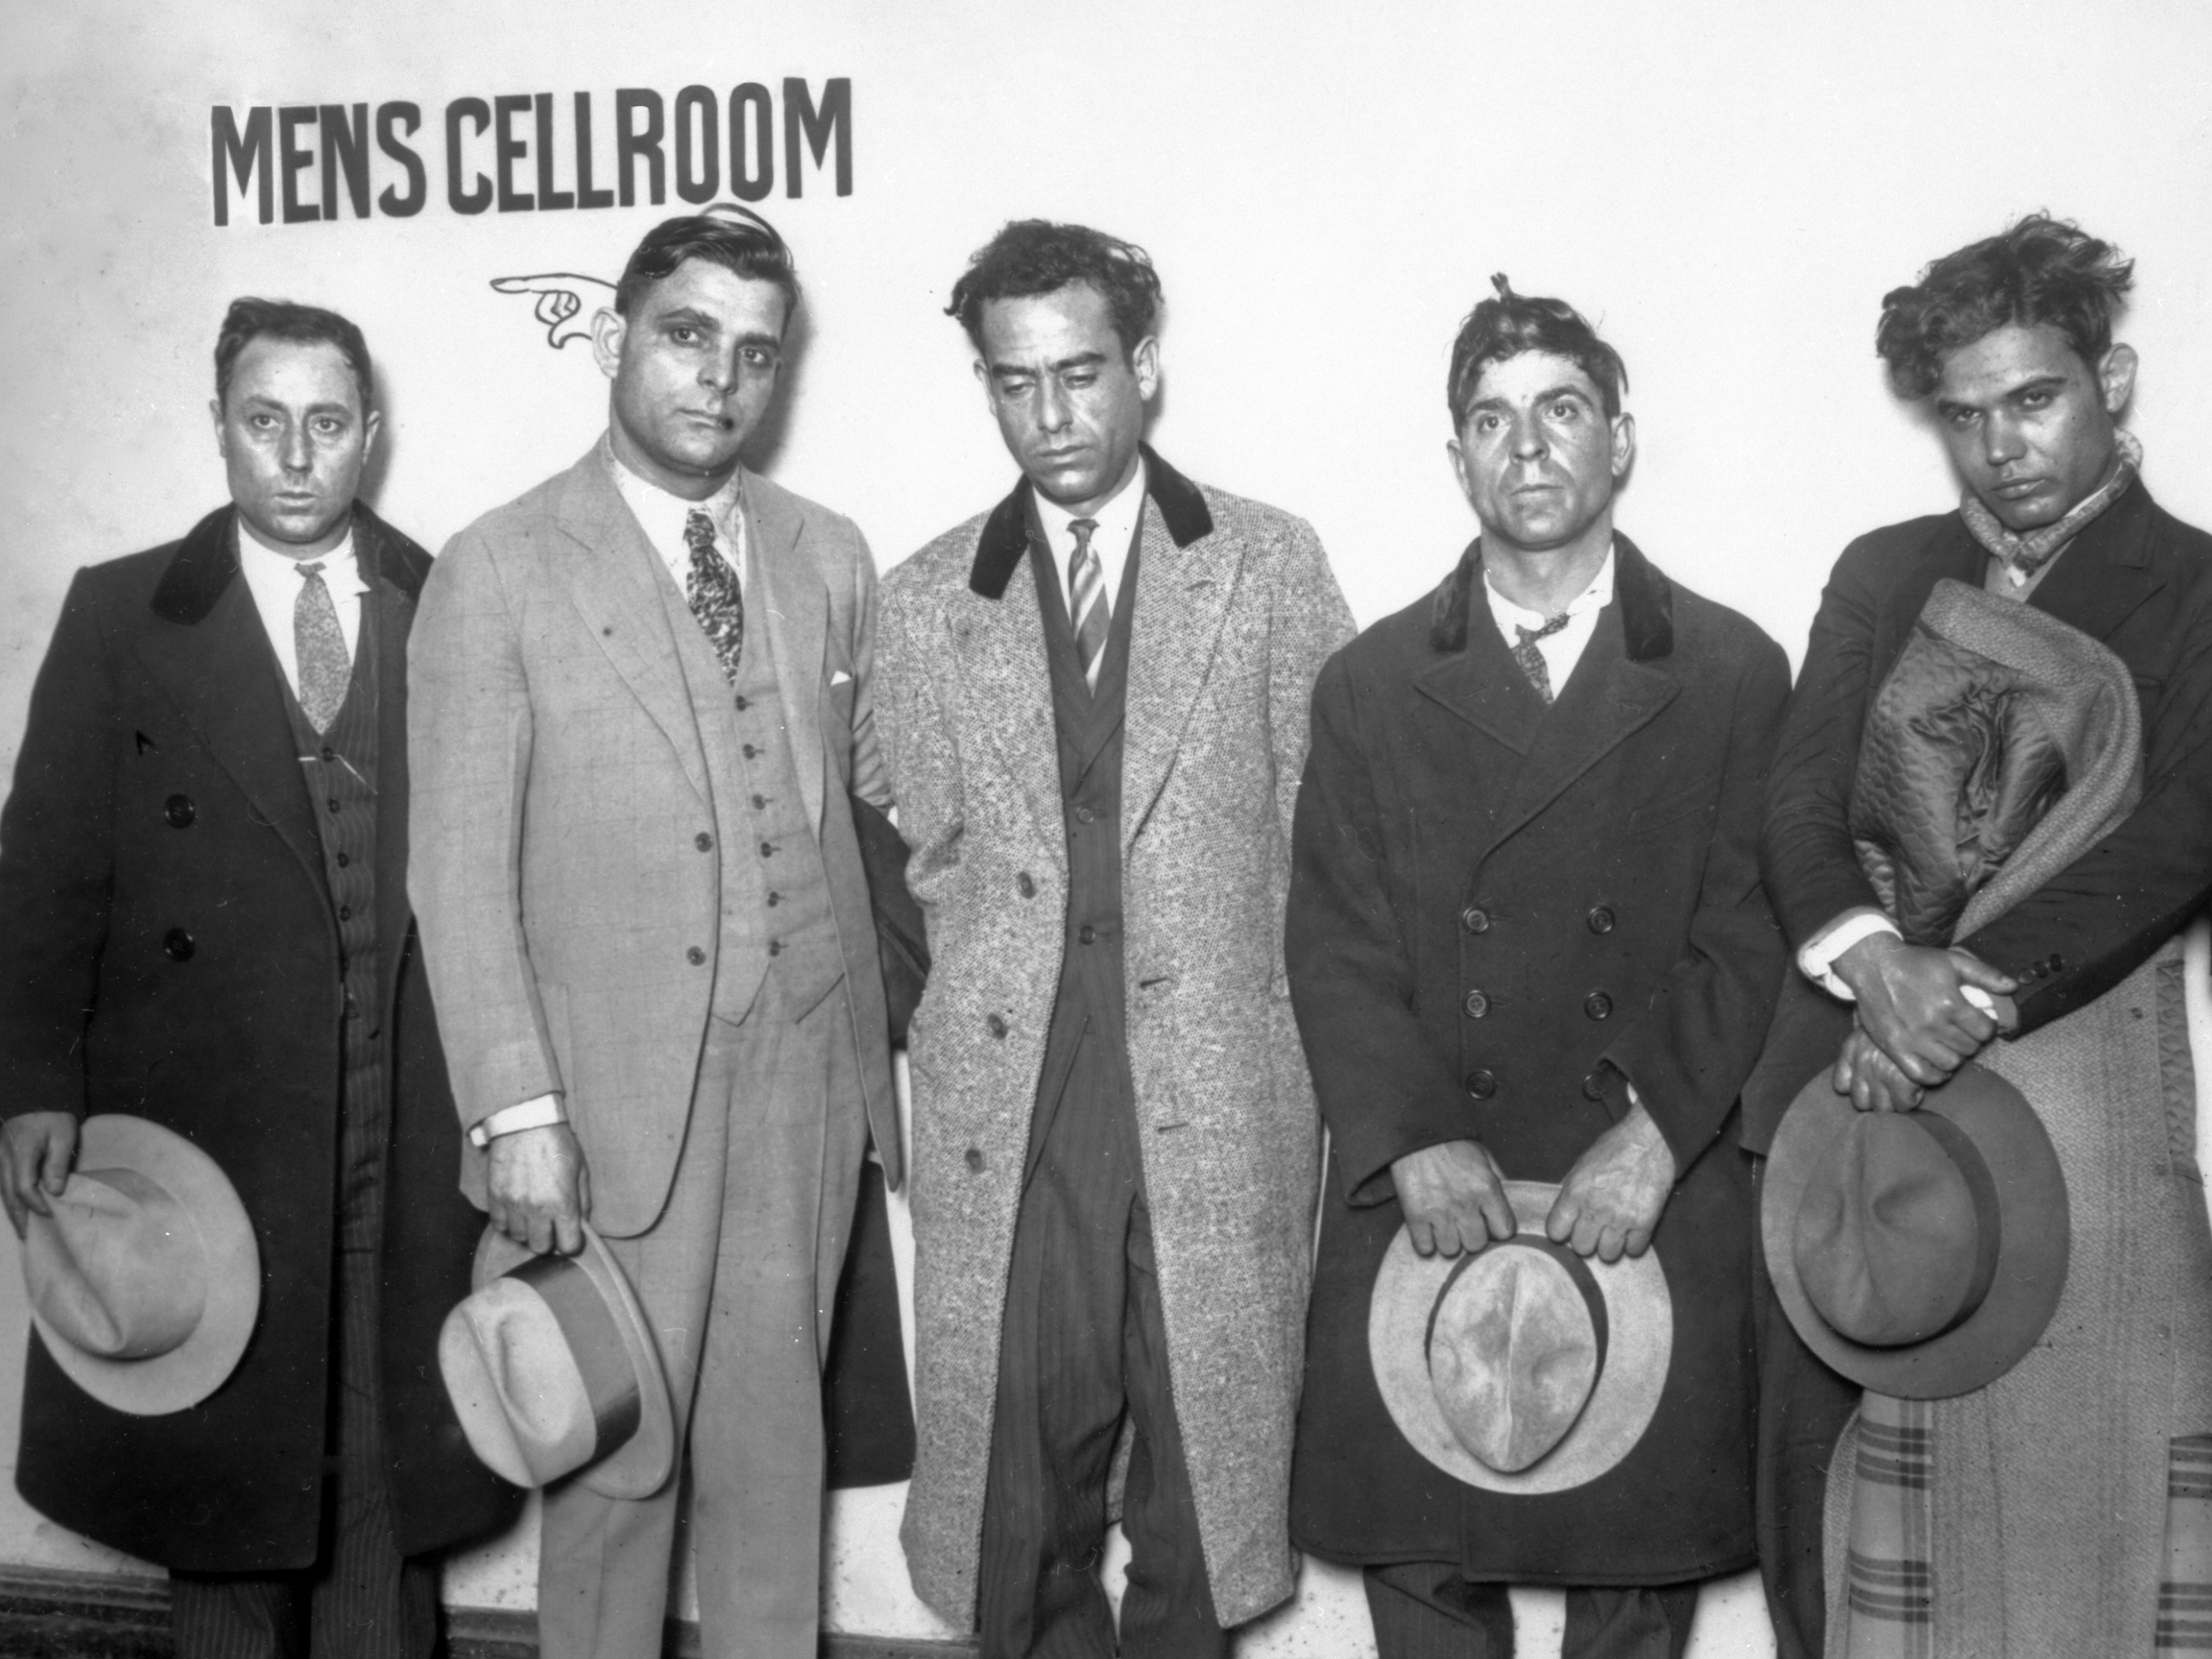 Vintage Picture Of The Italian American Mob